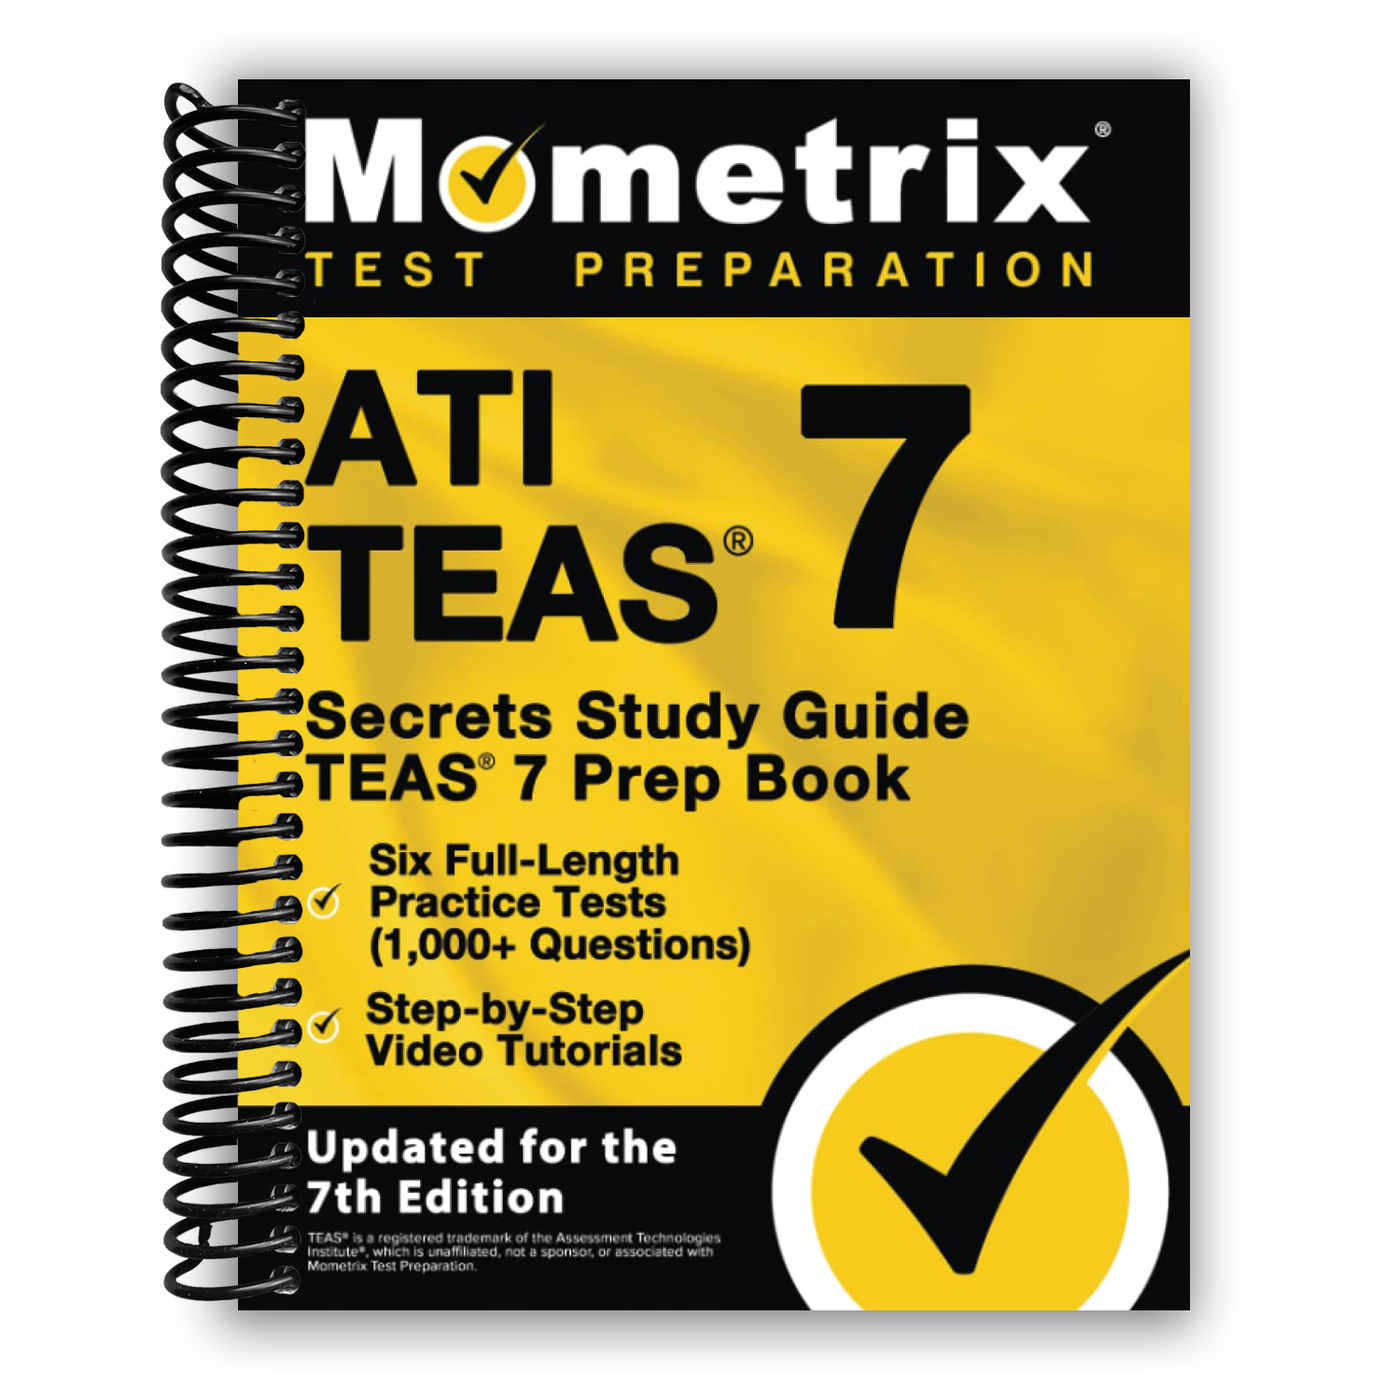 ATI TEAS Secrets Study Guide: TEAS 7 Prep Book, Six Full-Length Practice Tests (1,000+ Questions), Step-by-Step Video Tutorials: [Updated for the 7th Edition] (Spiral Bound)